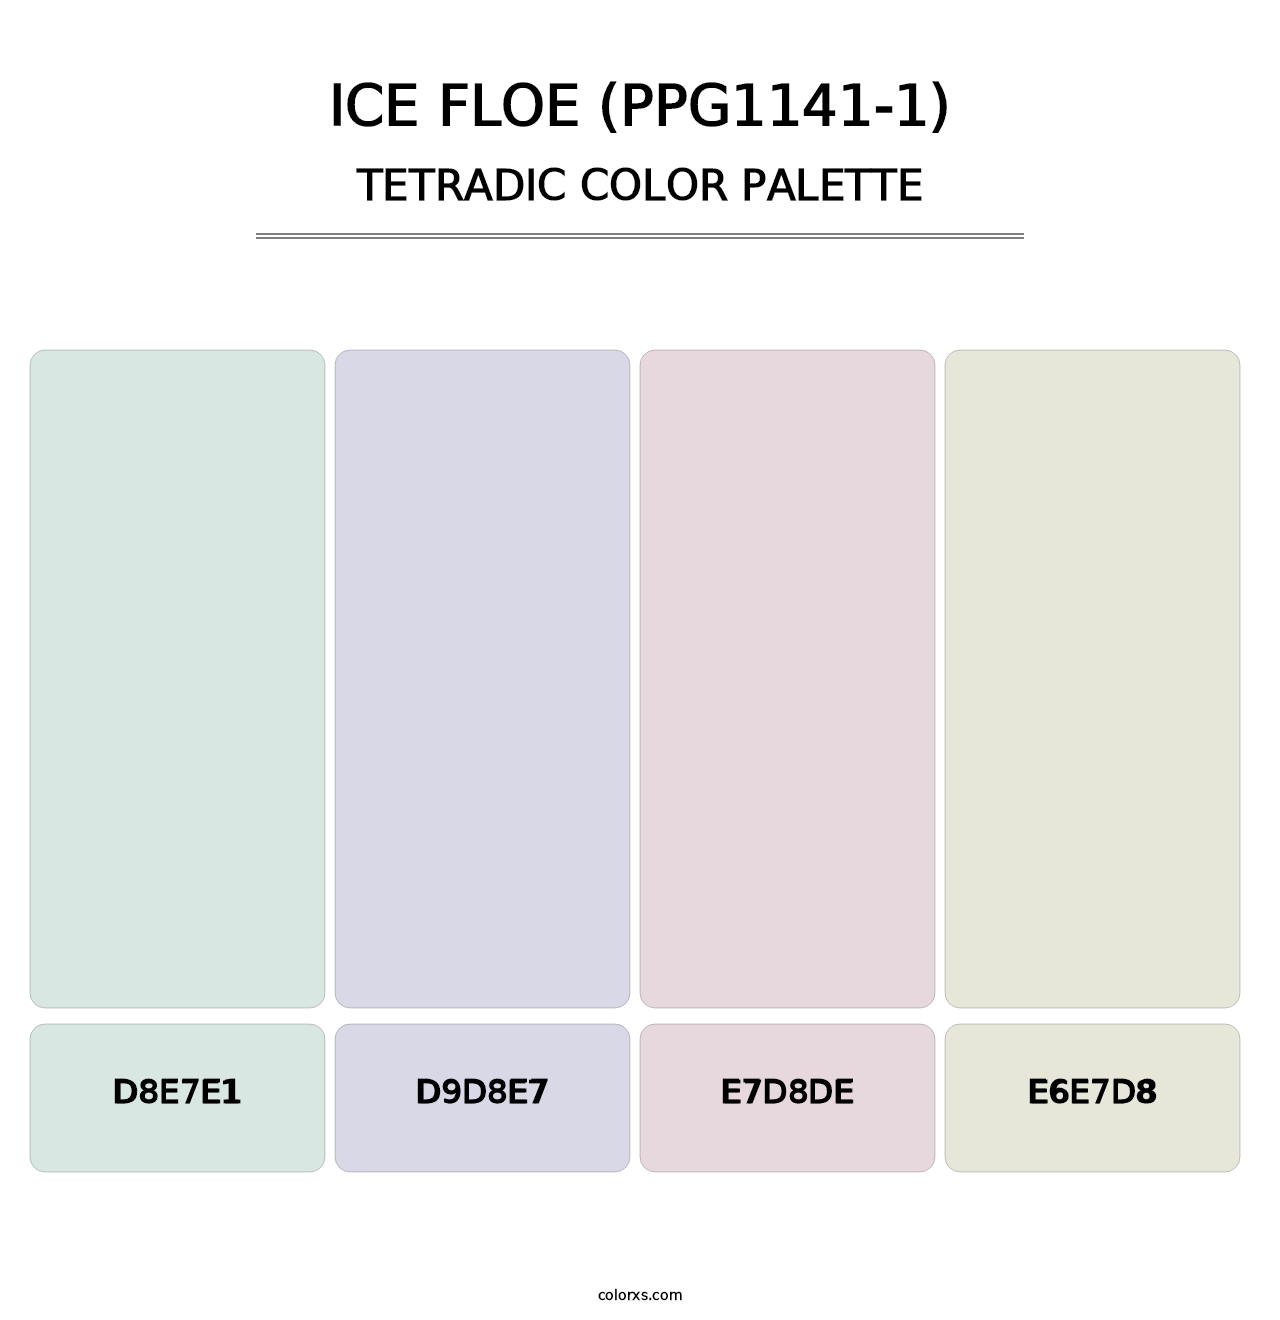 Ice Floe (PPG1141-1) - Tetradic Color Palette